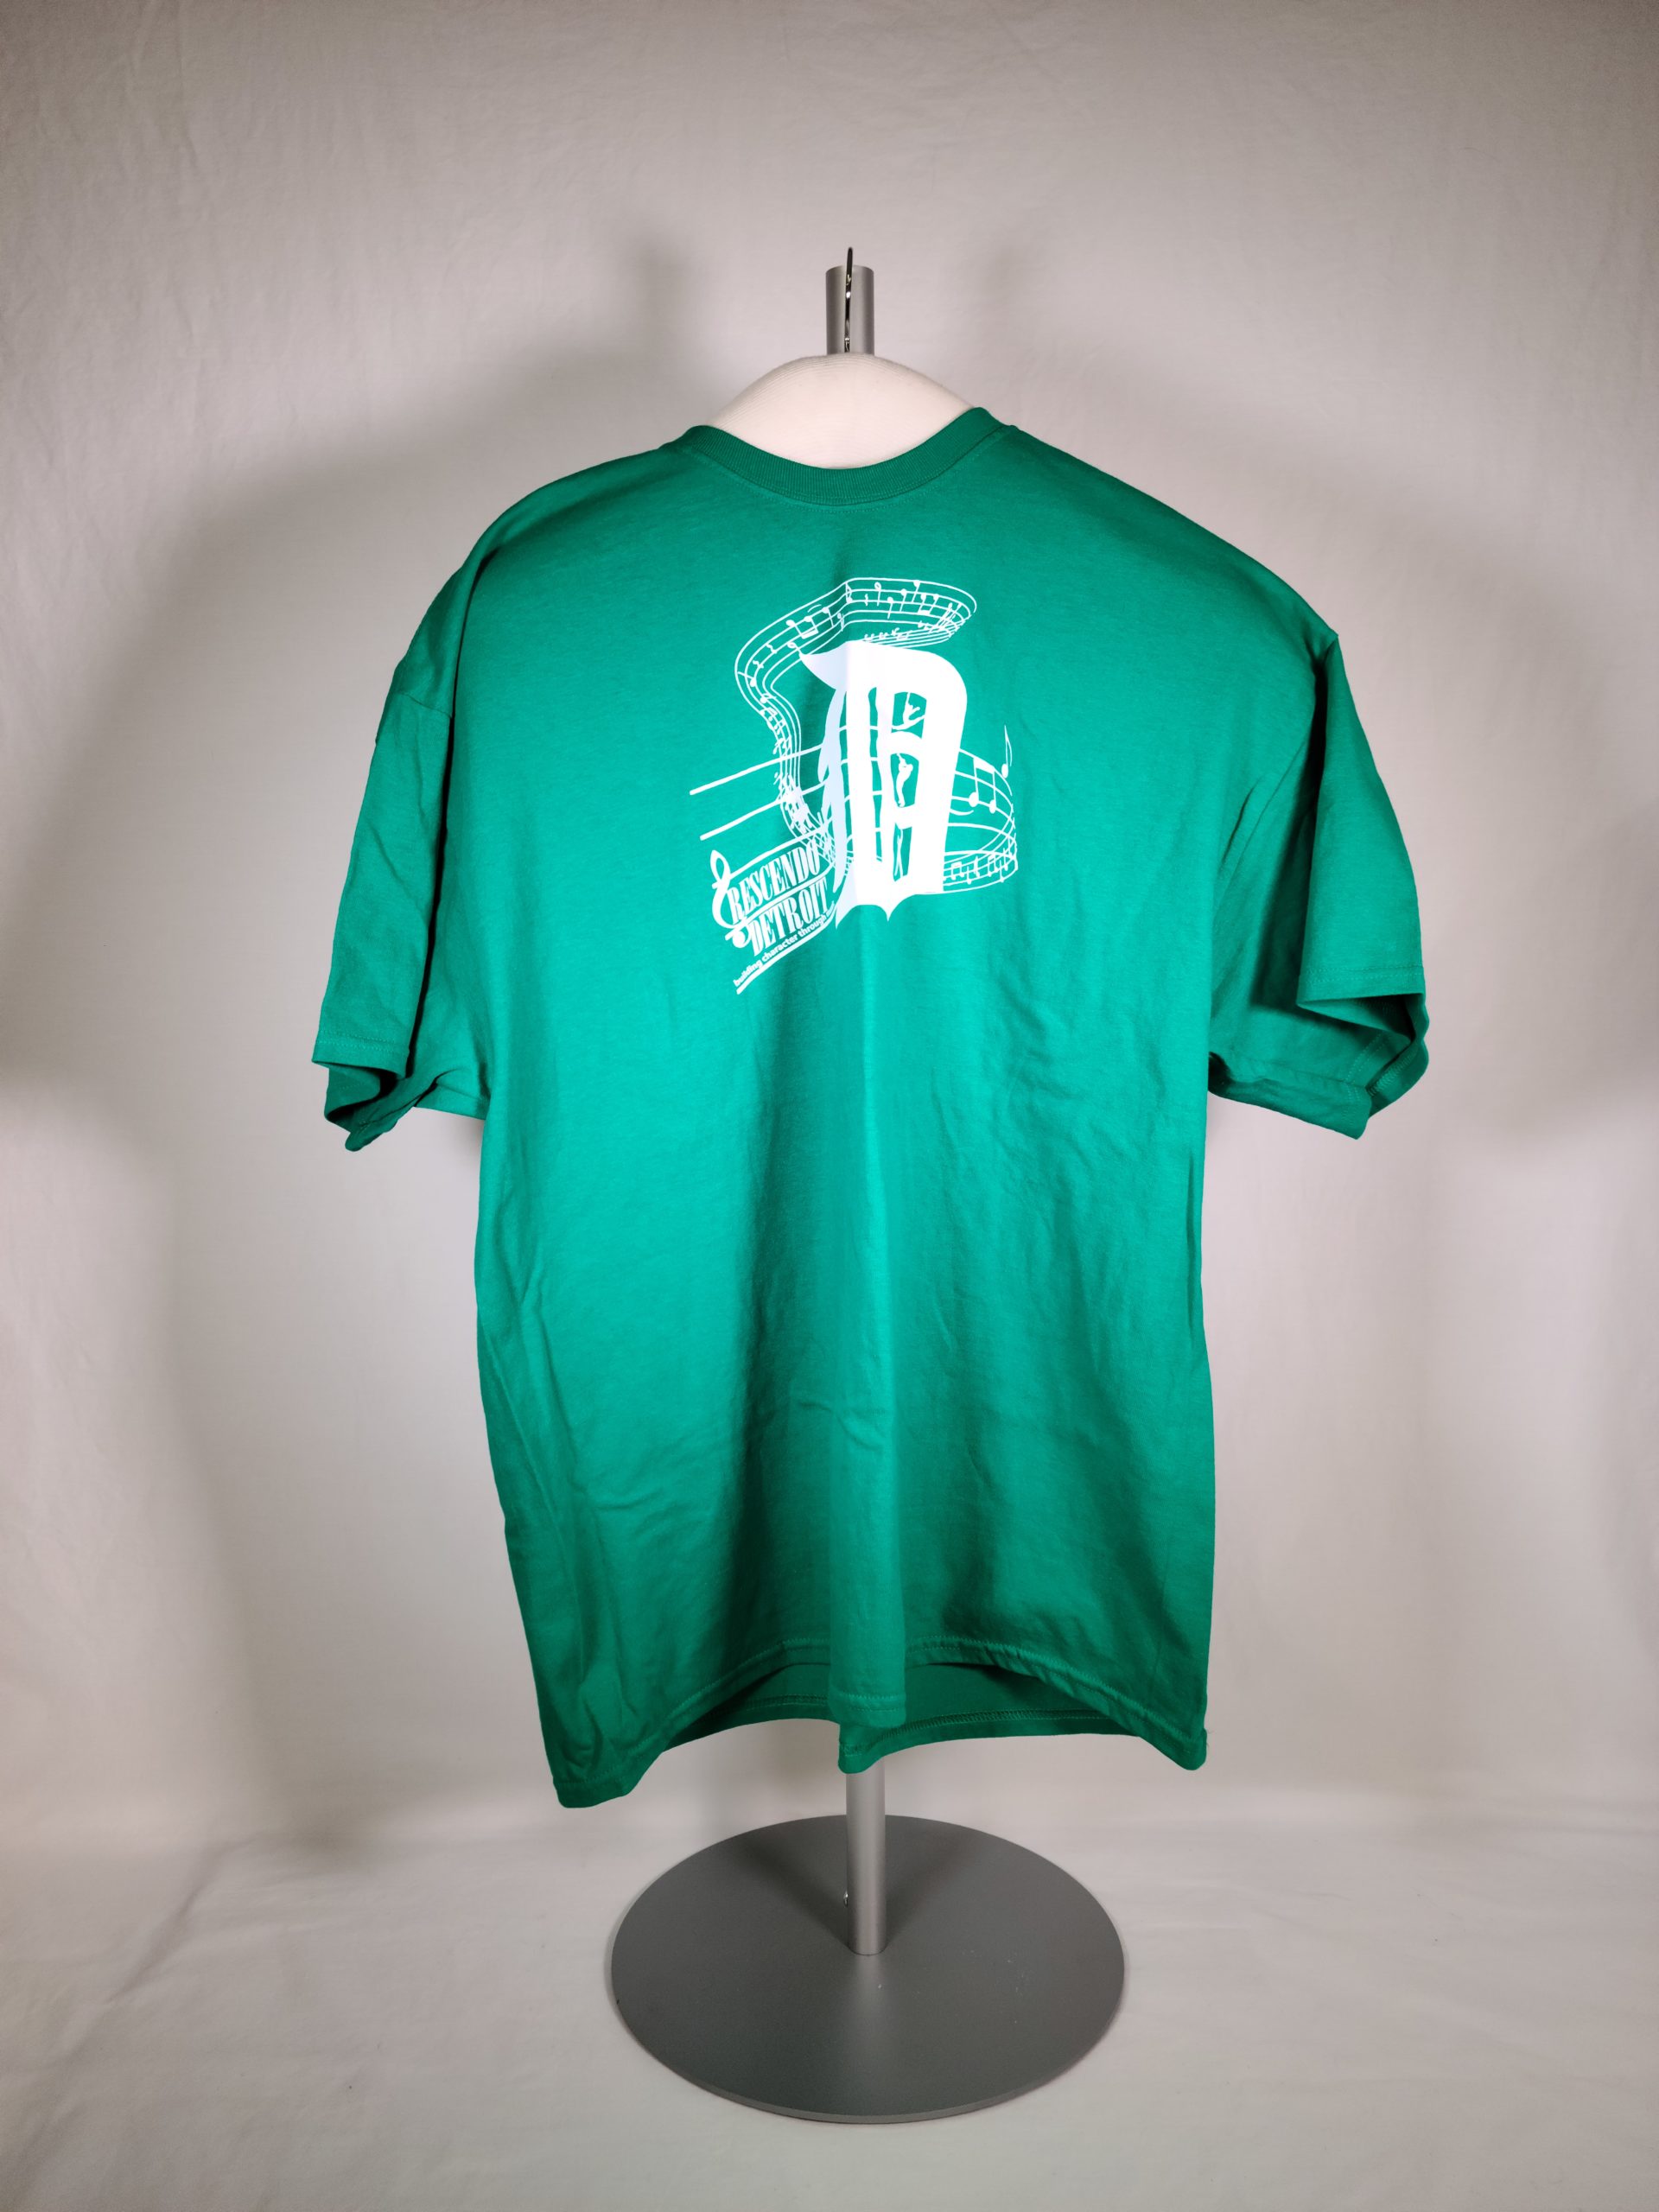 A green t-shirt with white logo for "Crescendo Detroit"